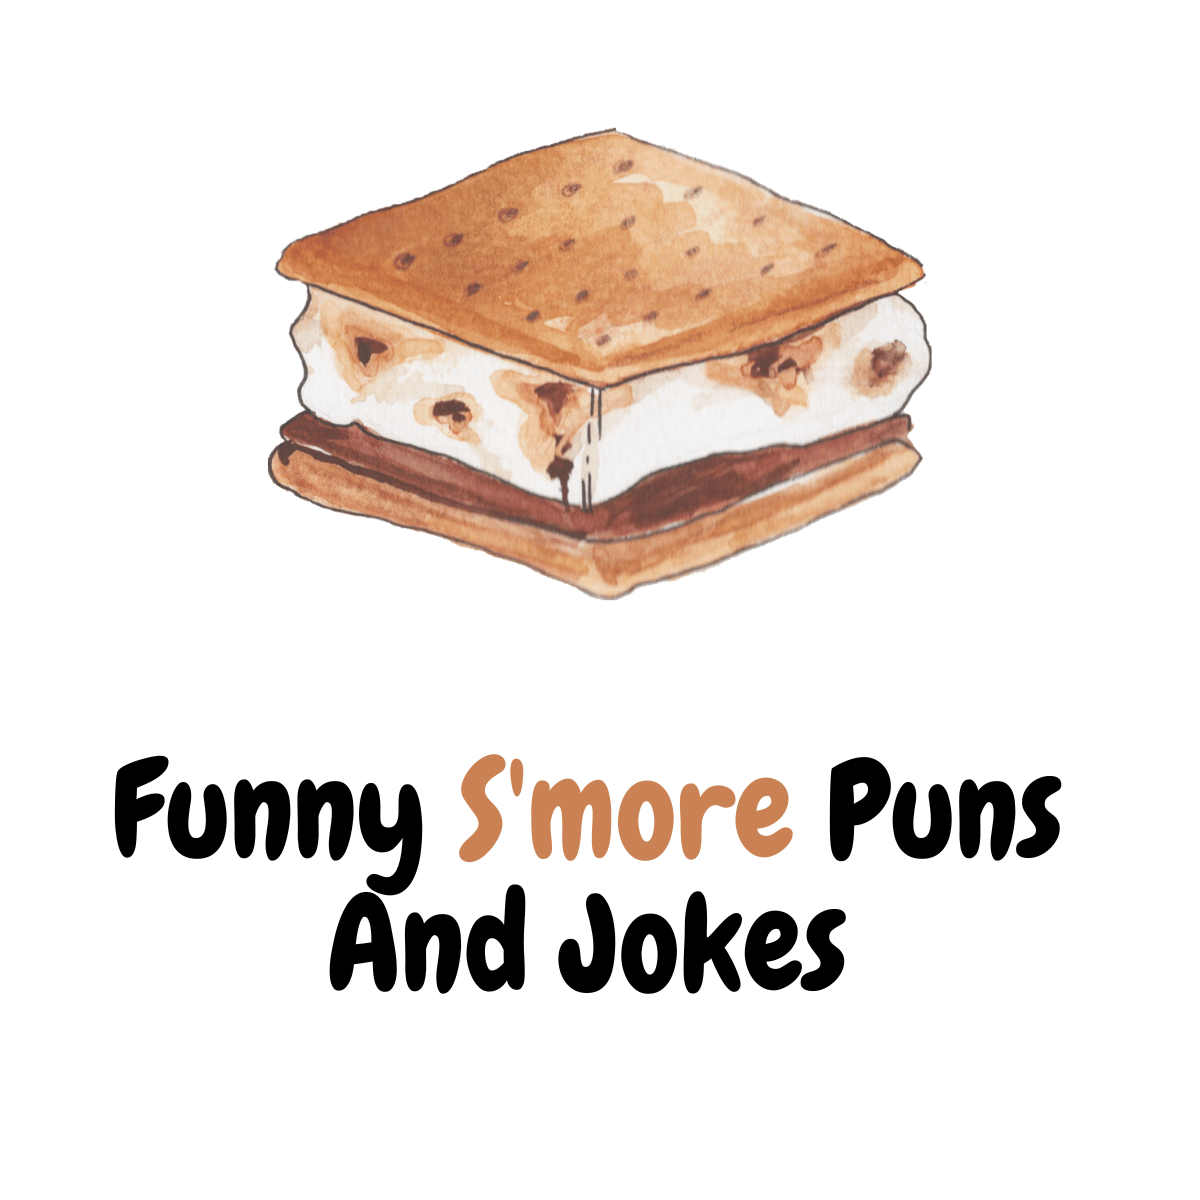 120+ Funny S’more Puns And Jokes: S’morelicious Humor